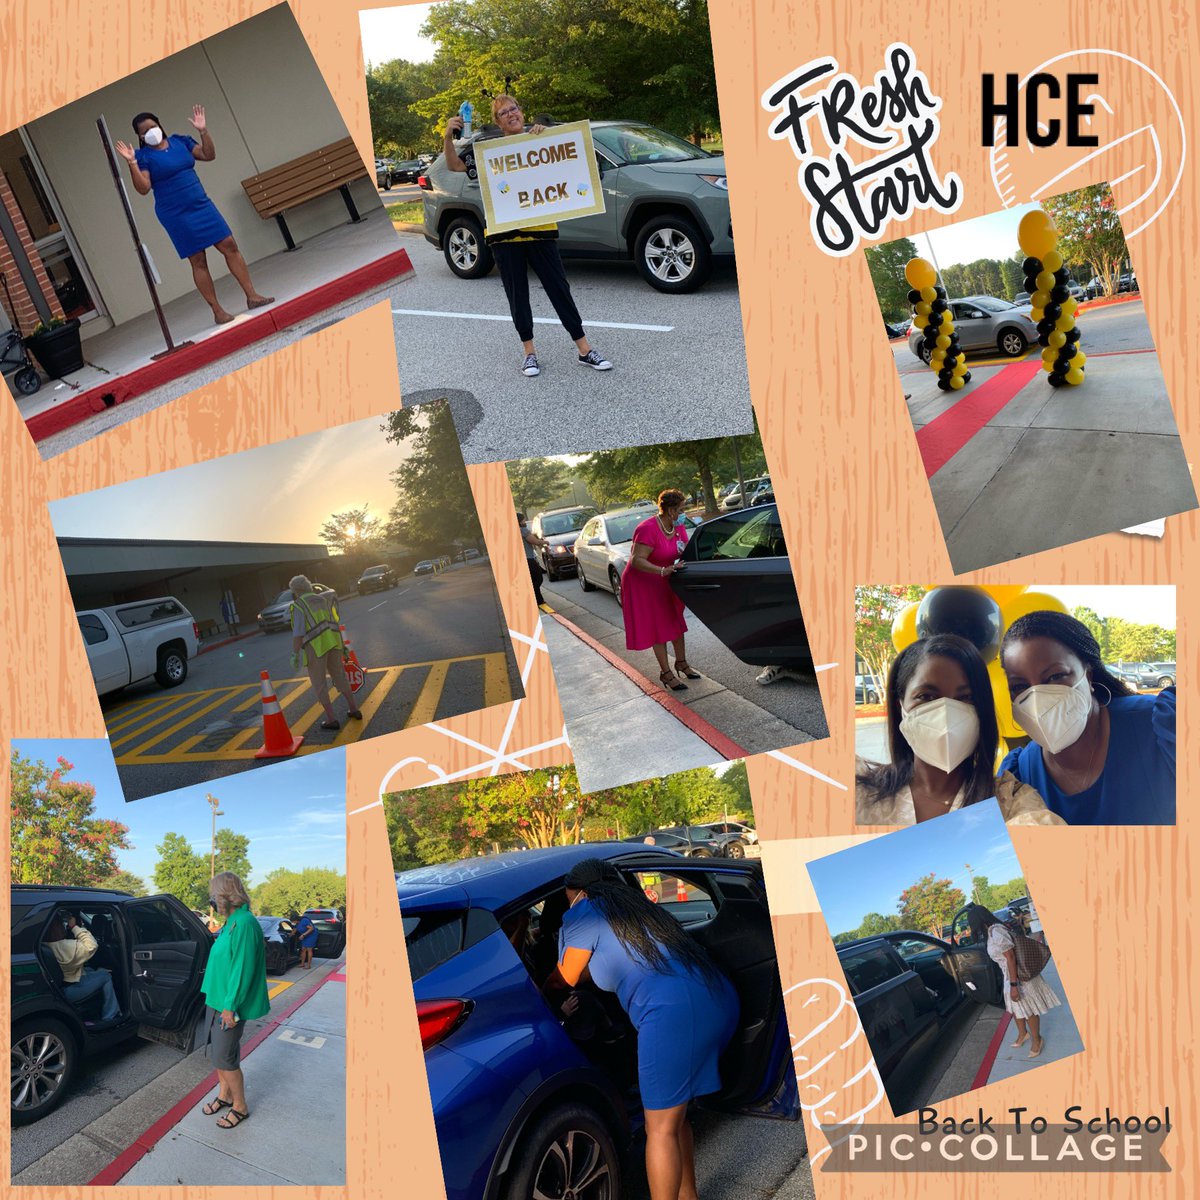 Welcoming students on the 1st day of school @hce_stemacademy was a team effort. Thanks to Ms. Janice Morris, Rockdale Superior Court, and Dr. McDermon, RCPS, for assisting.